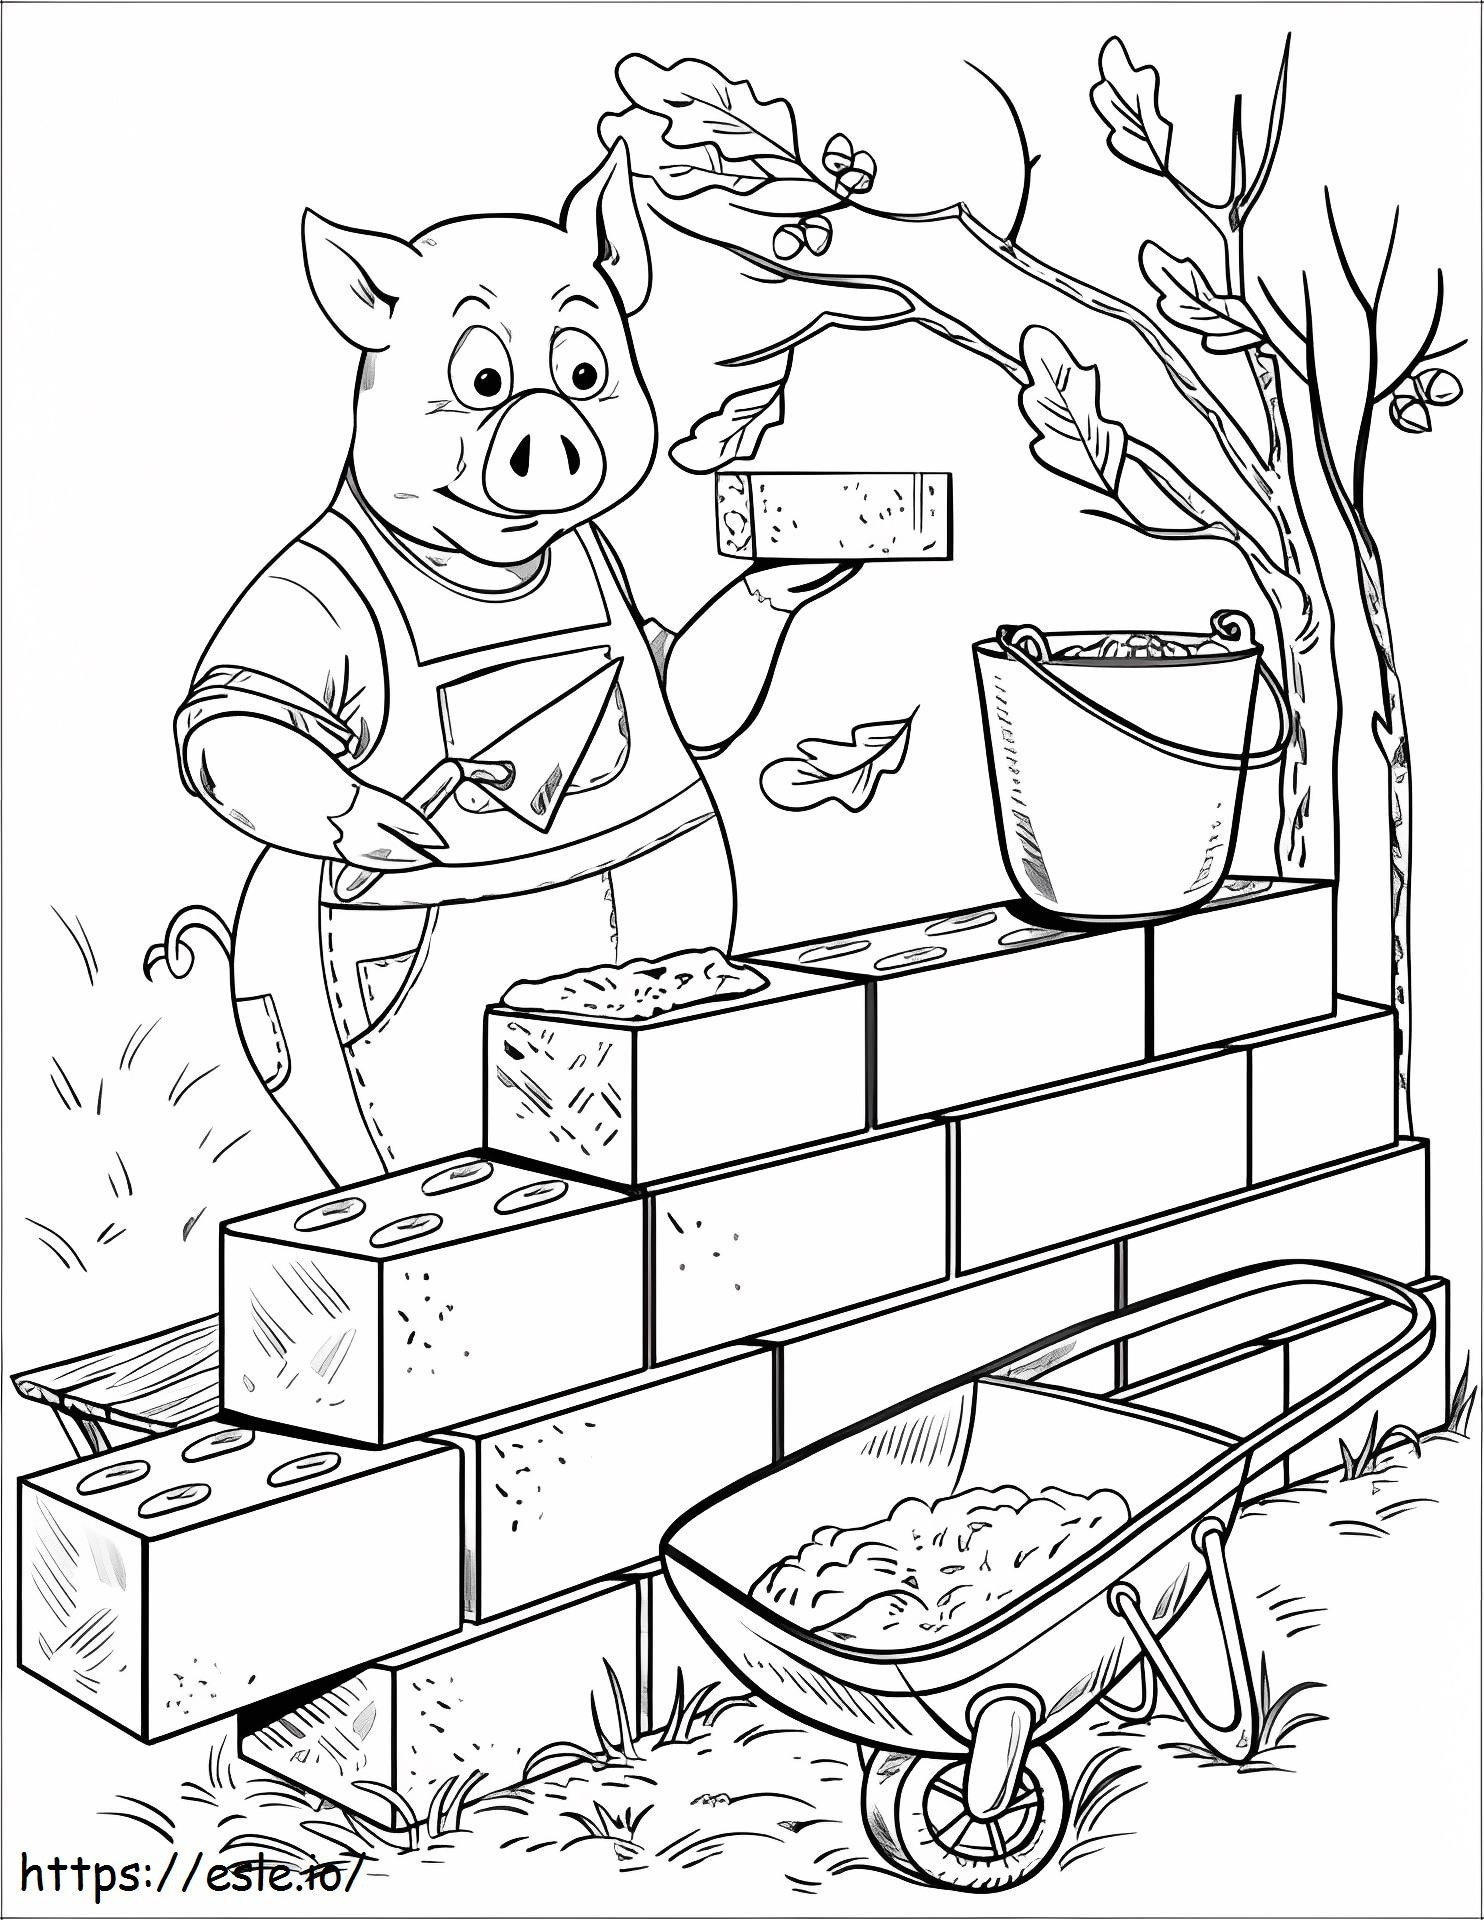 1530071426 2 coloring page